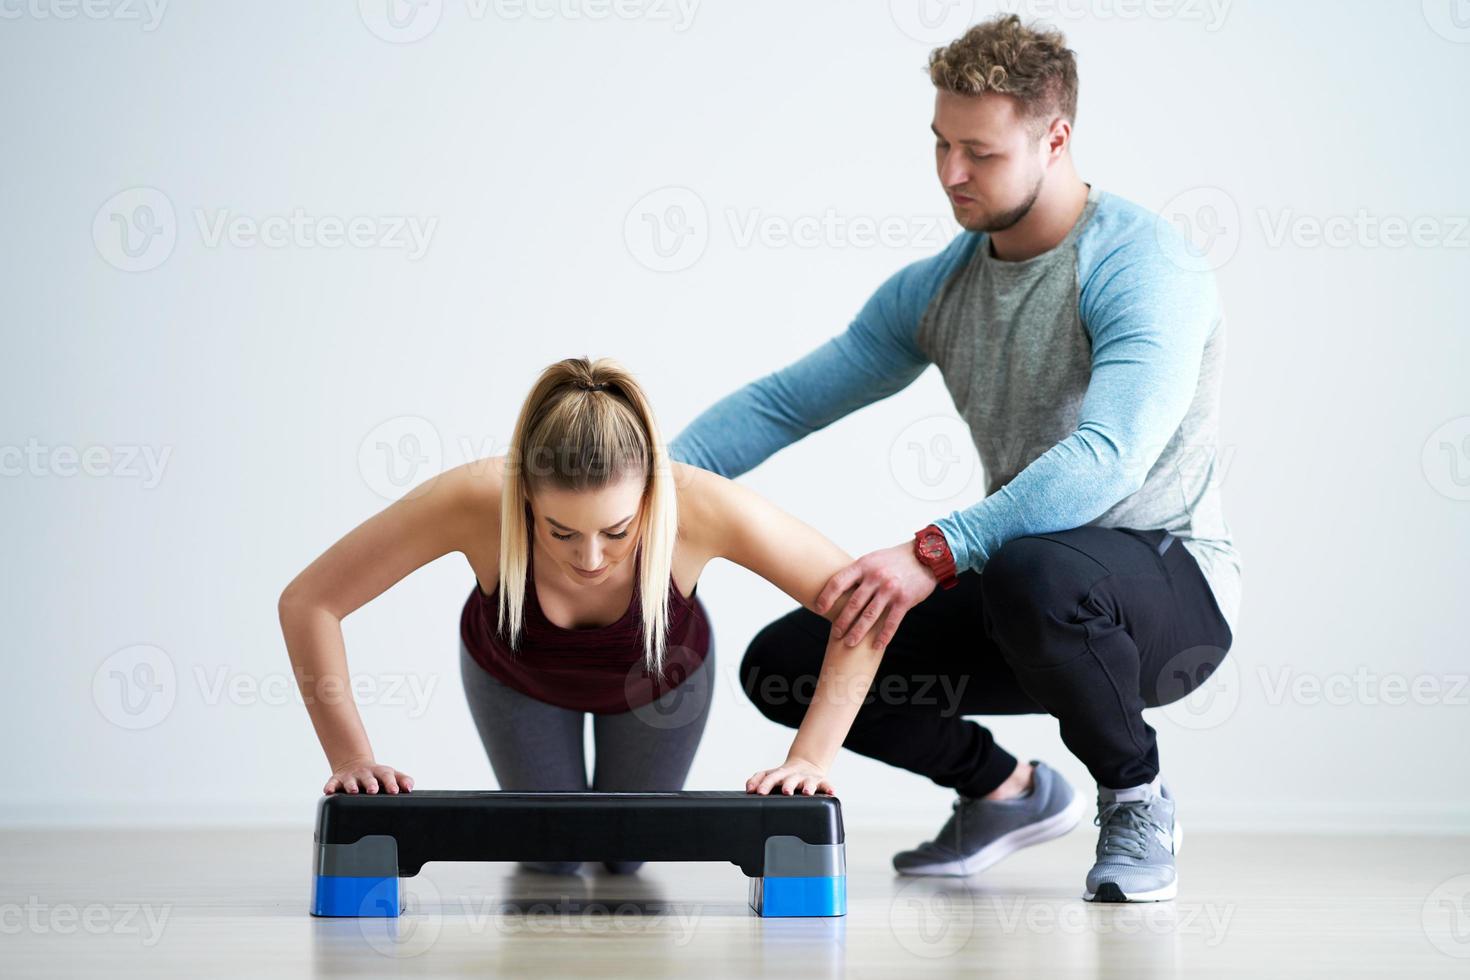 Woman with her personal fitness trainer photo